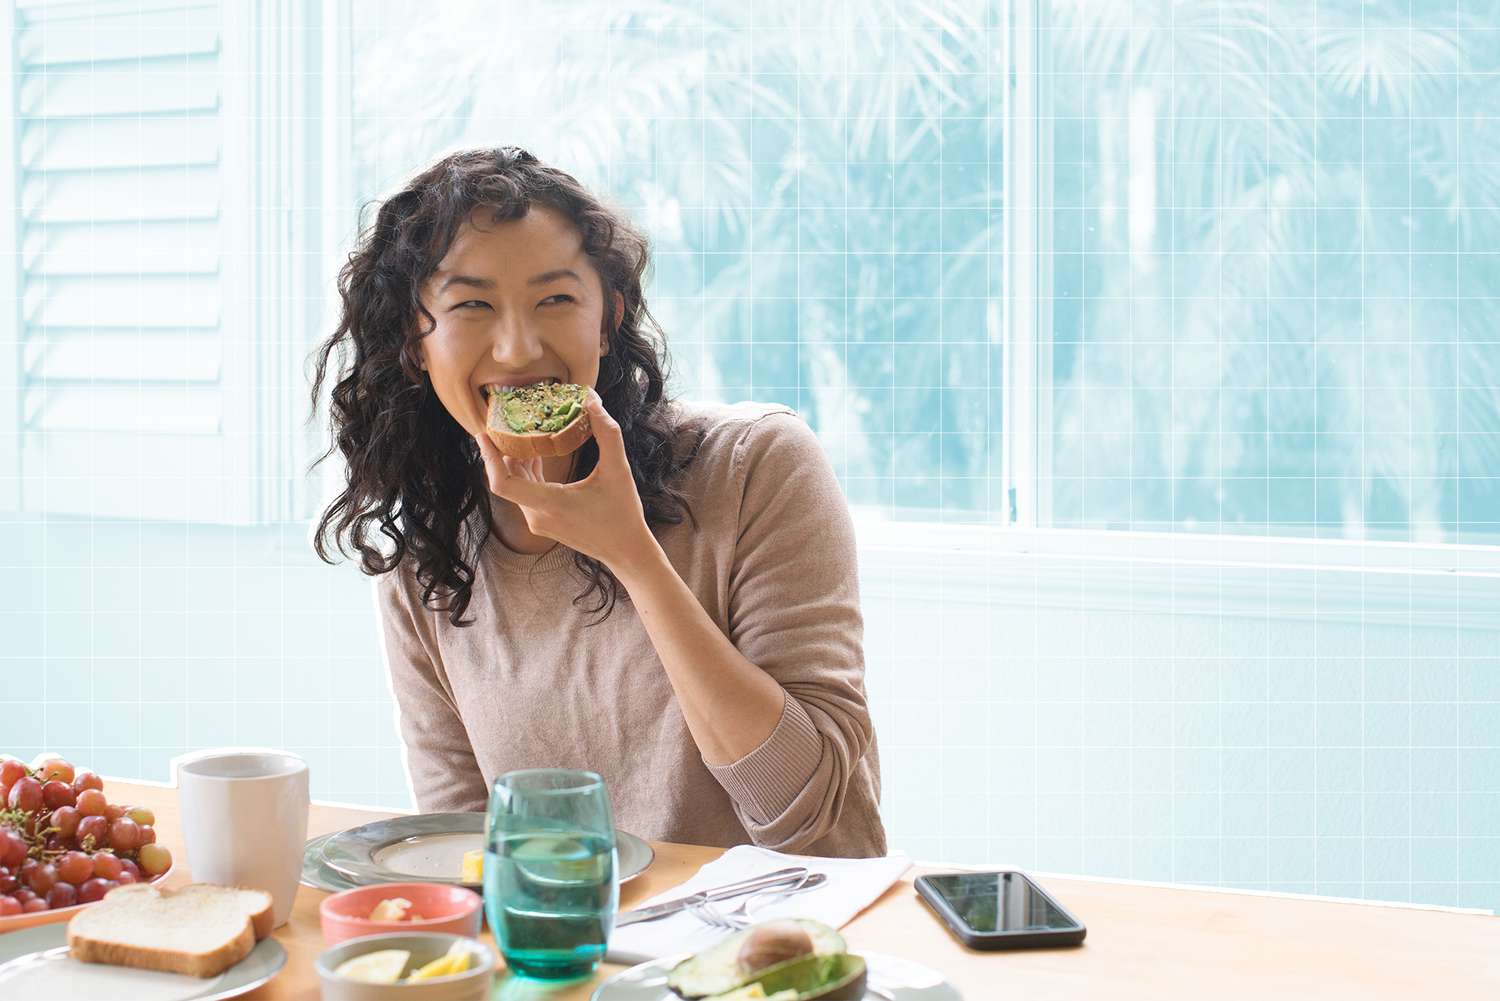 Young woman eating avocado toast at home